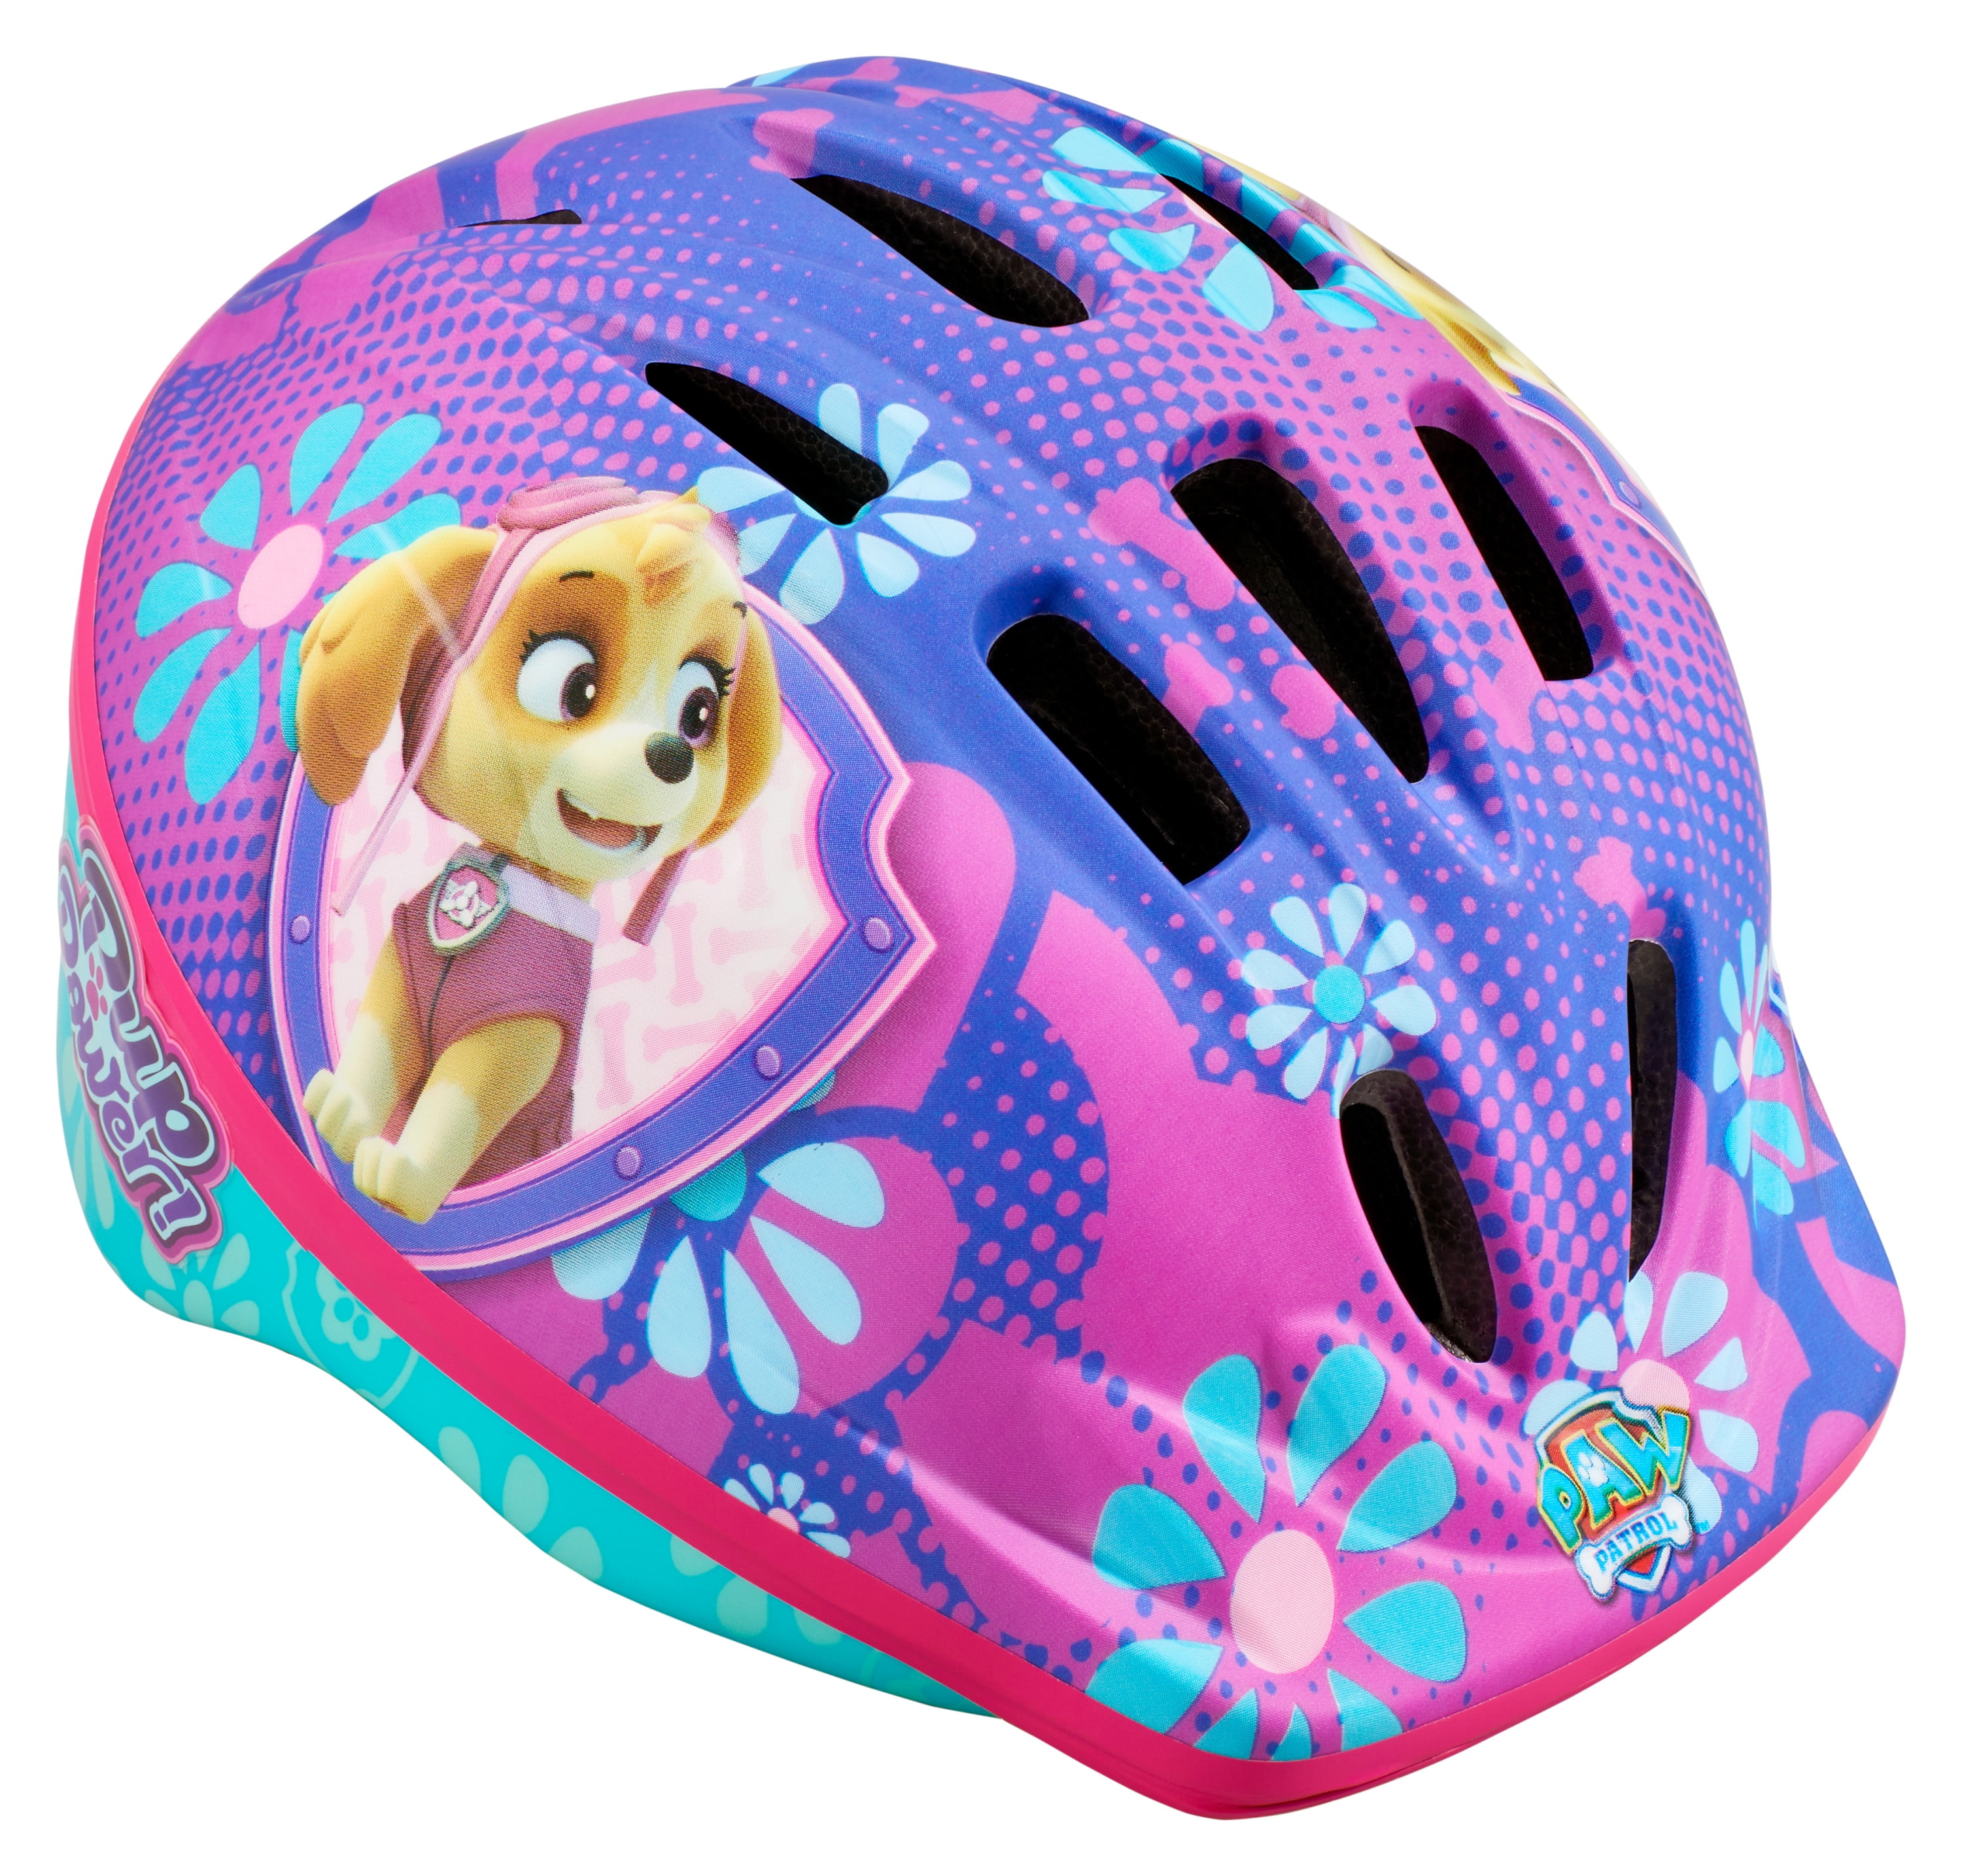 Details about   Nickelodeon's Sky PAW Patrol Girl Bicycle Helmet Pink New ages 3-5 Pink 